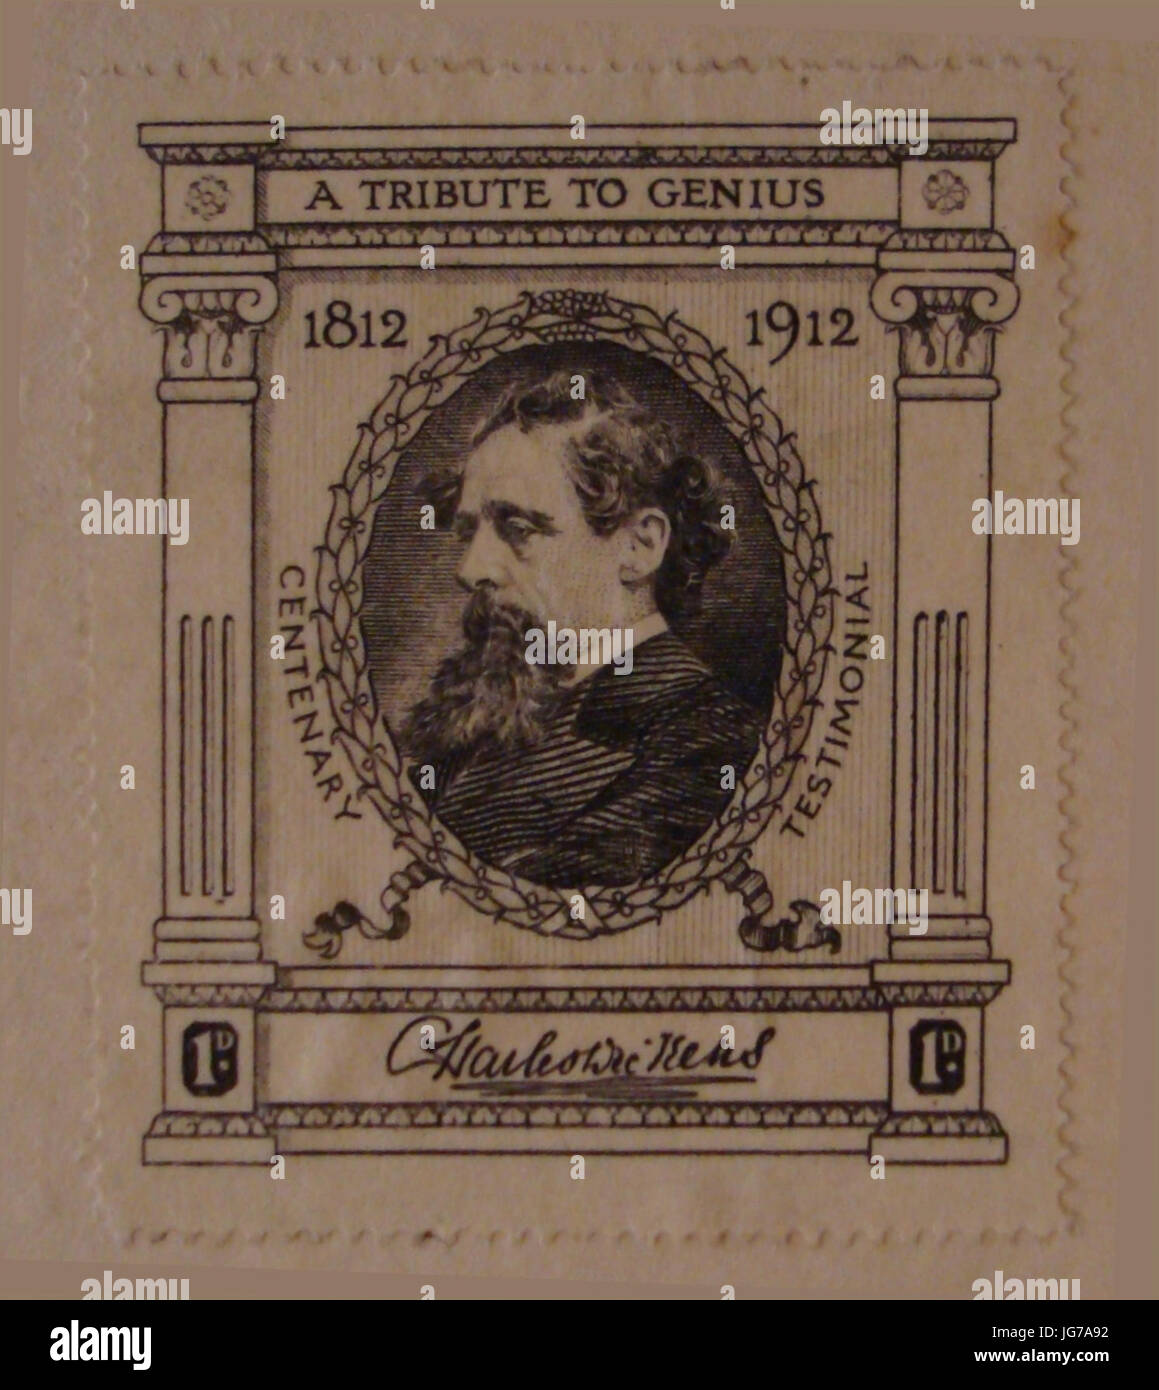 Stamp in The Centenary Edition of The Works of Charles Dickens in 36 Volumes. 36 vols. Chapman & Hall, Ltd.- London (and Charles Scribner s Son- New York), 1910-1912 rotated Stock Photo